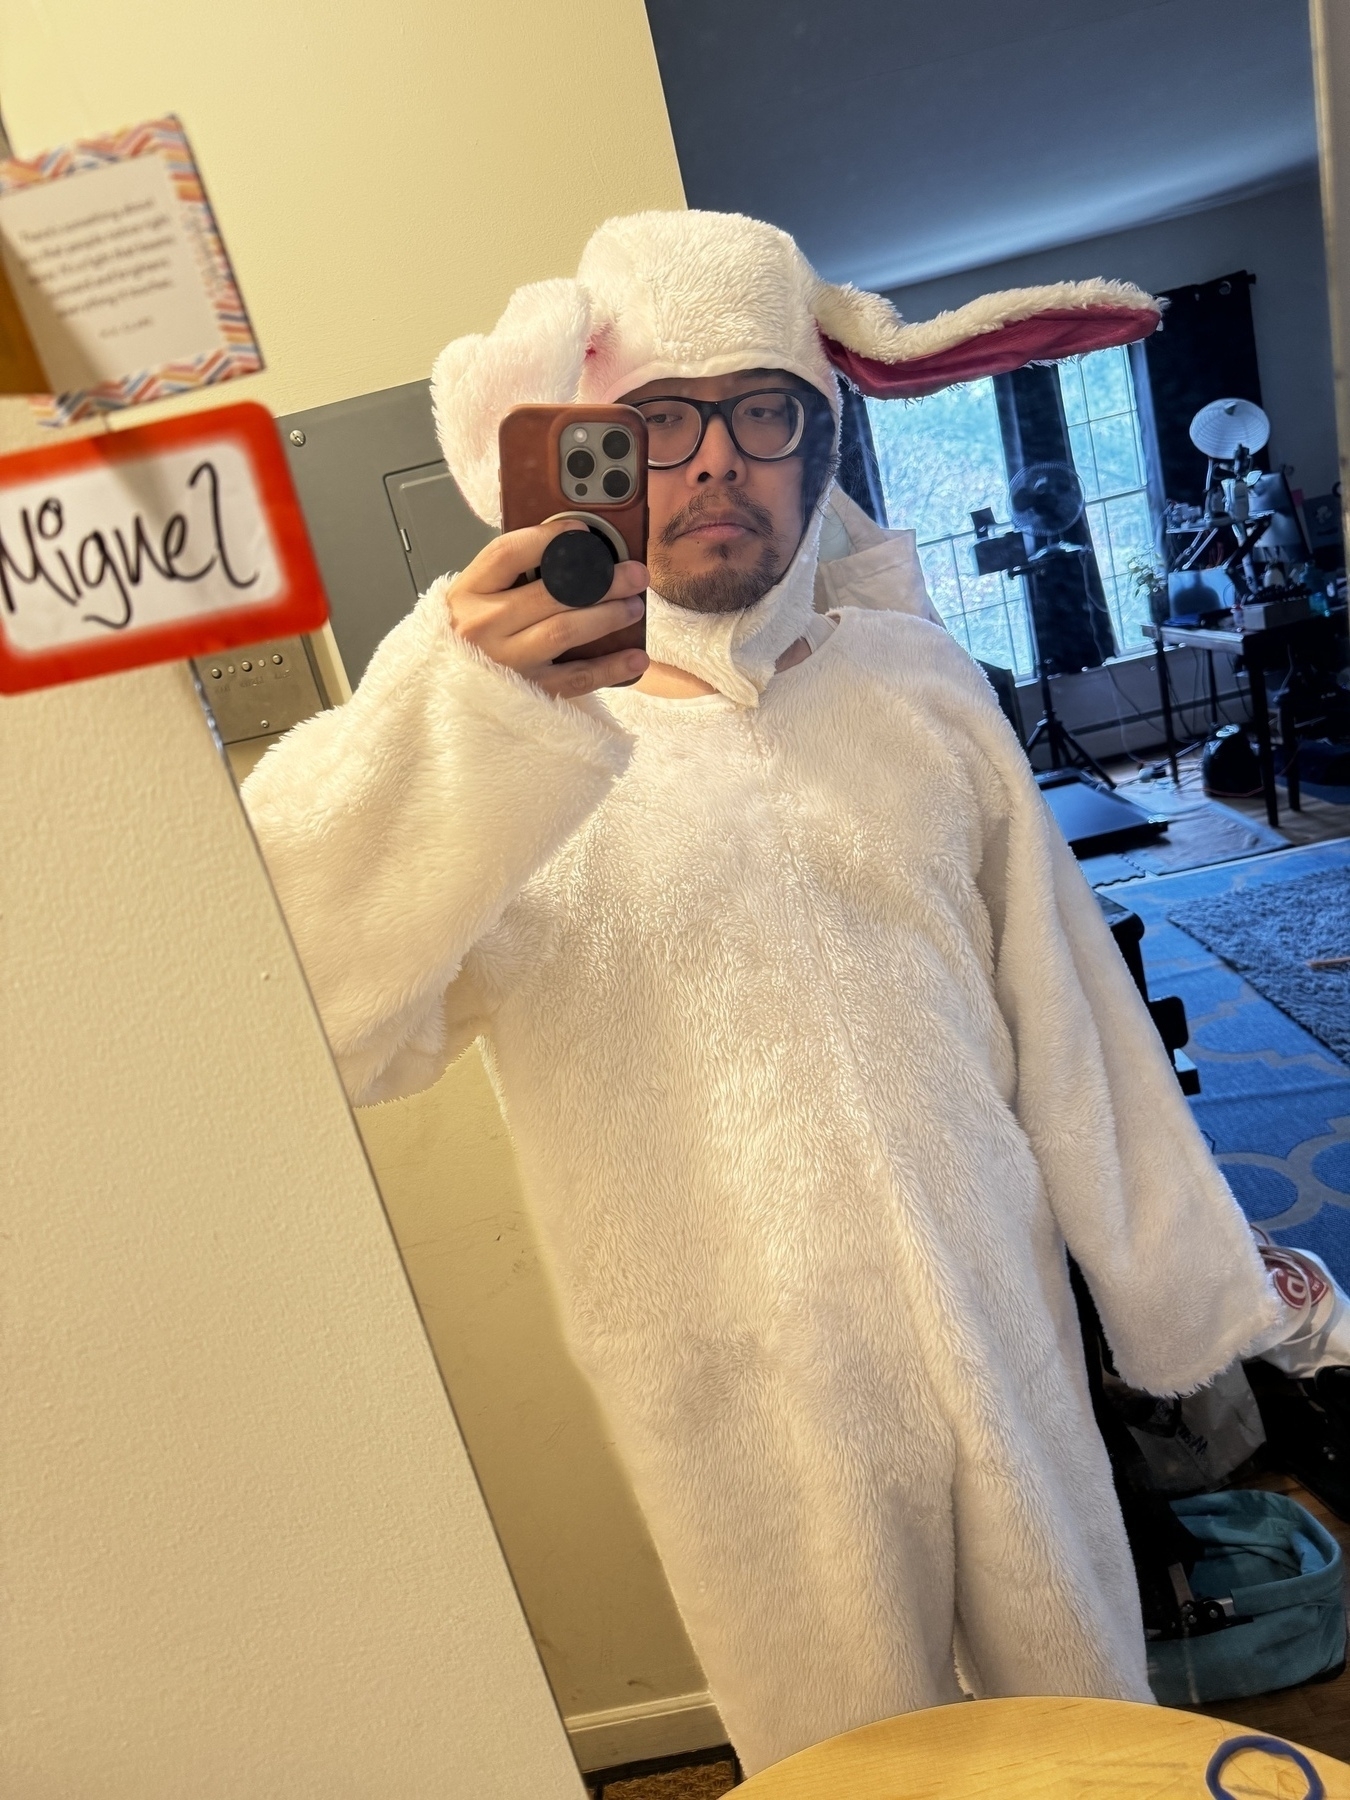  A person wearing a white bunny costume with a pink inner ear and black glasses is taking a selfie in front of a mirror.